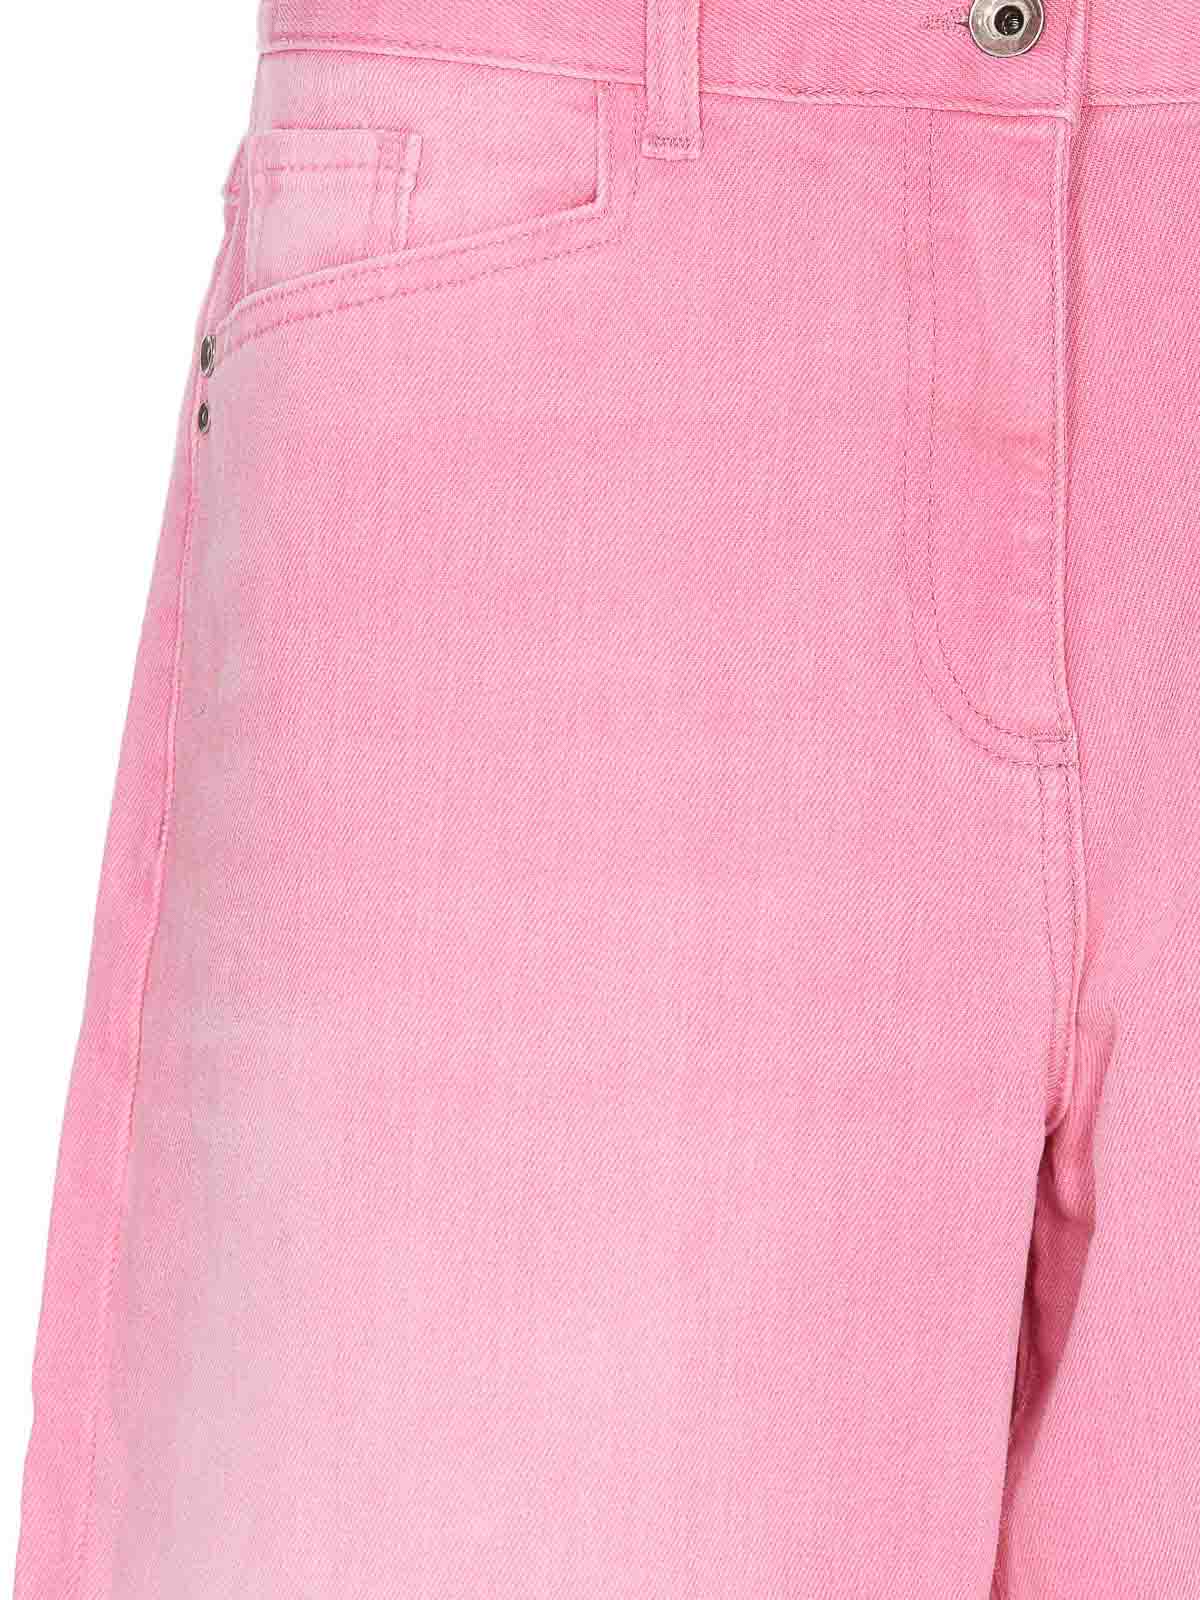 Shop Patrizia Pepe Pink Denim Jeans With Frontal Zip In Nude & Neutrals